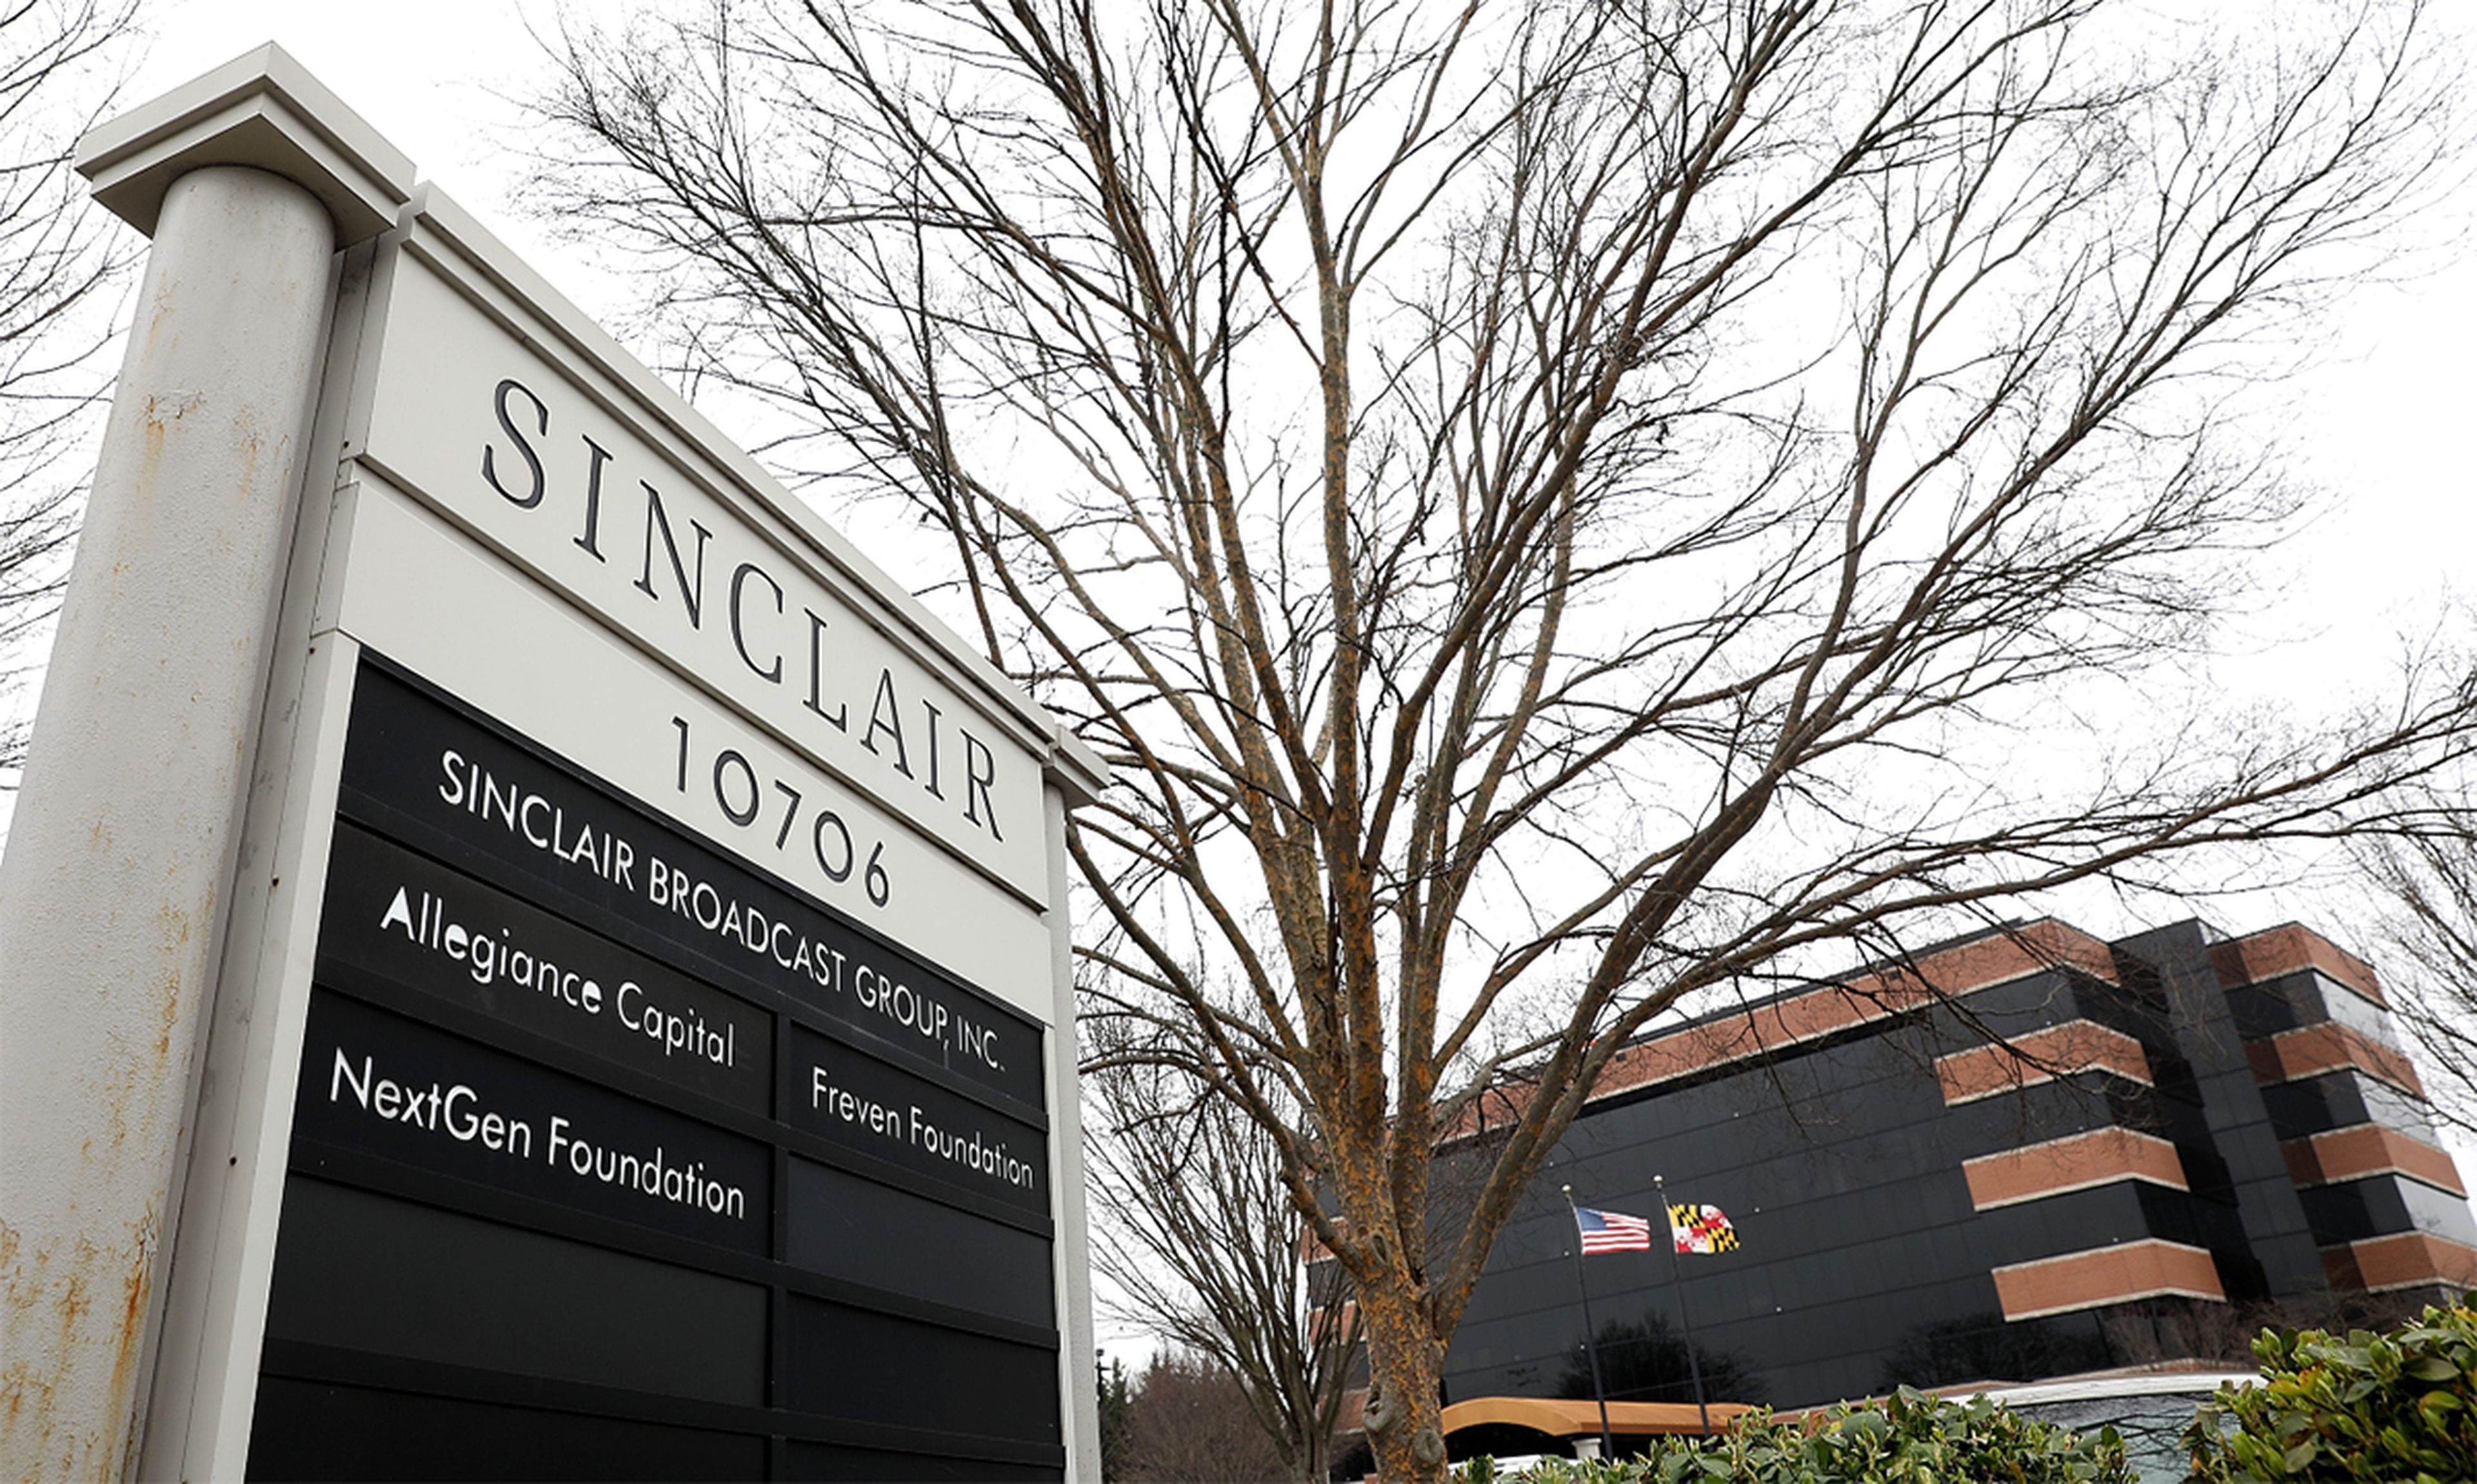 The headquarters of the Sinclair Broadcast Group in Hunt Valley, Md. Sinclair was hit by Evil Corp ransomware in October. (Photo by Win McNamee/Getty Images)